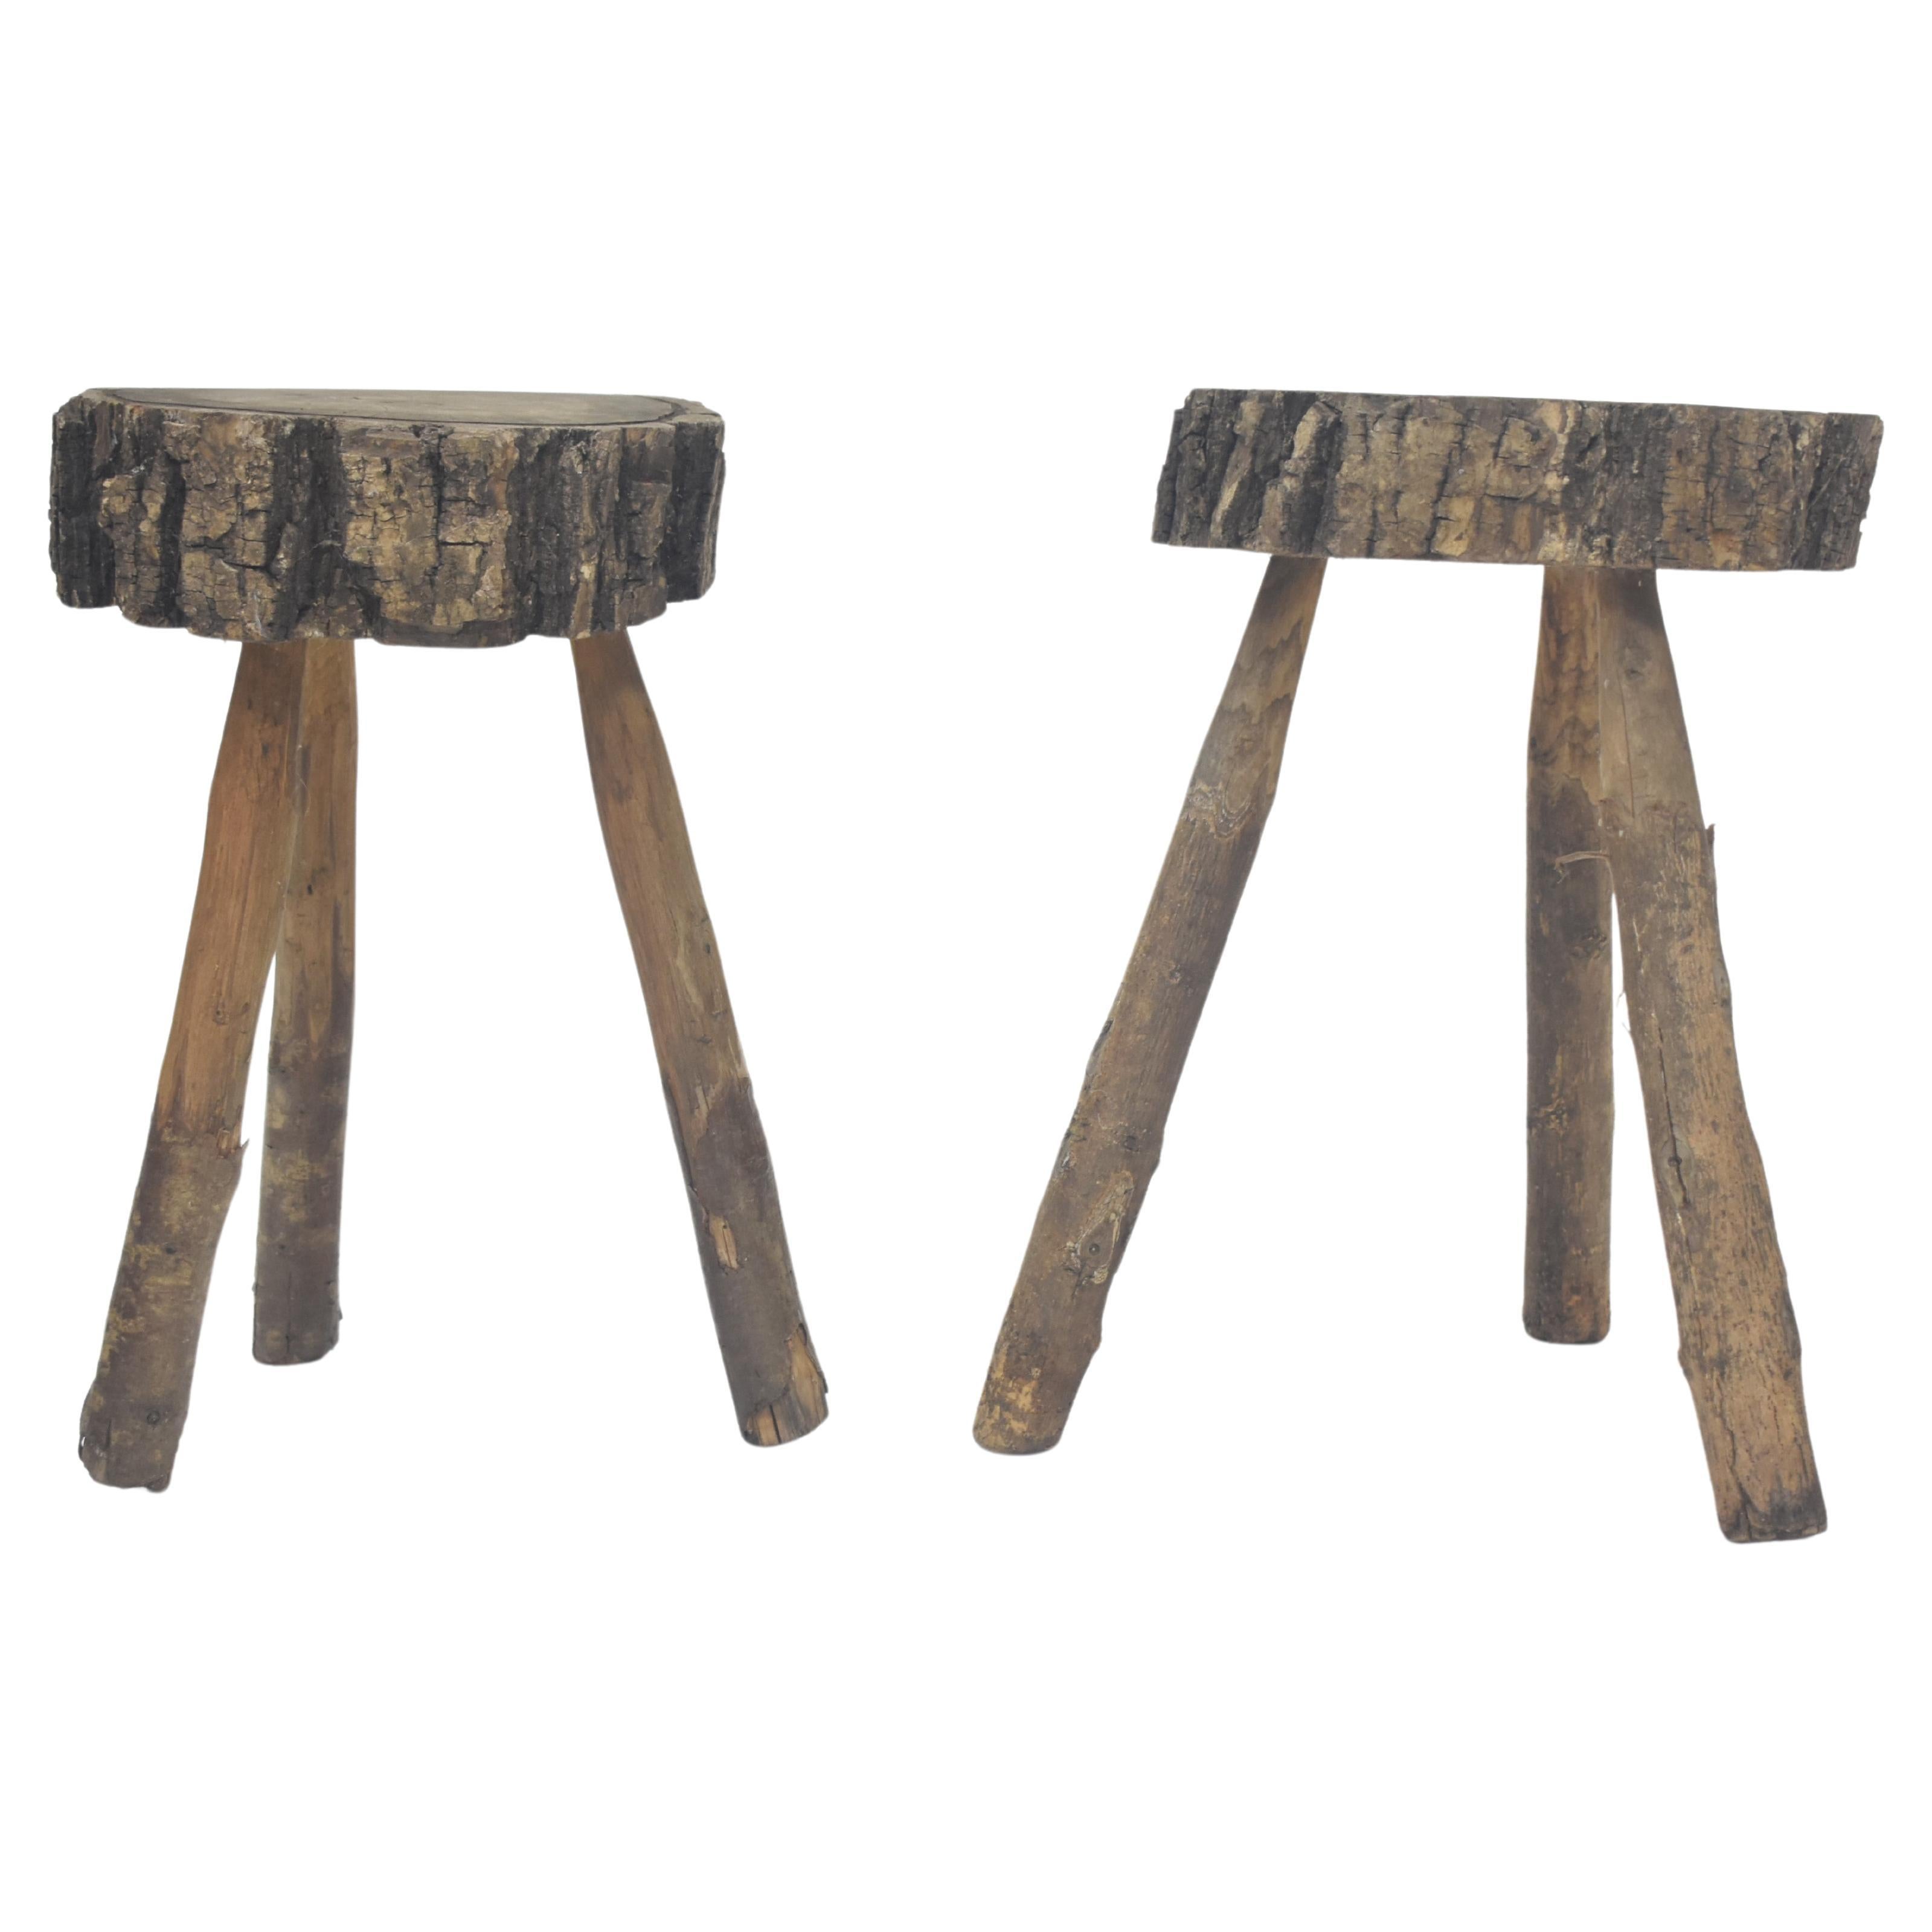 Rustic French Tree Trunk Tables For Sale